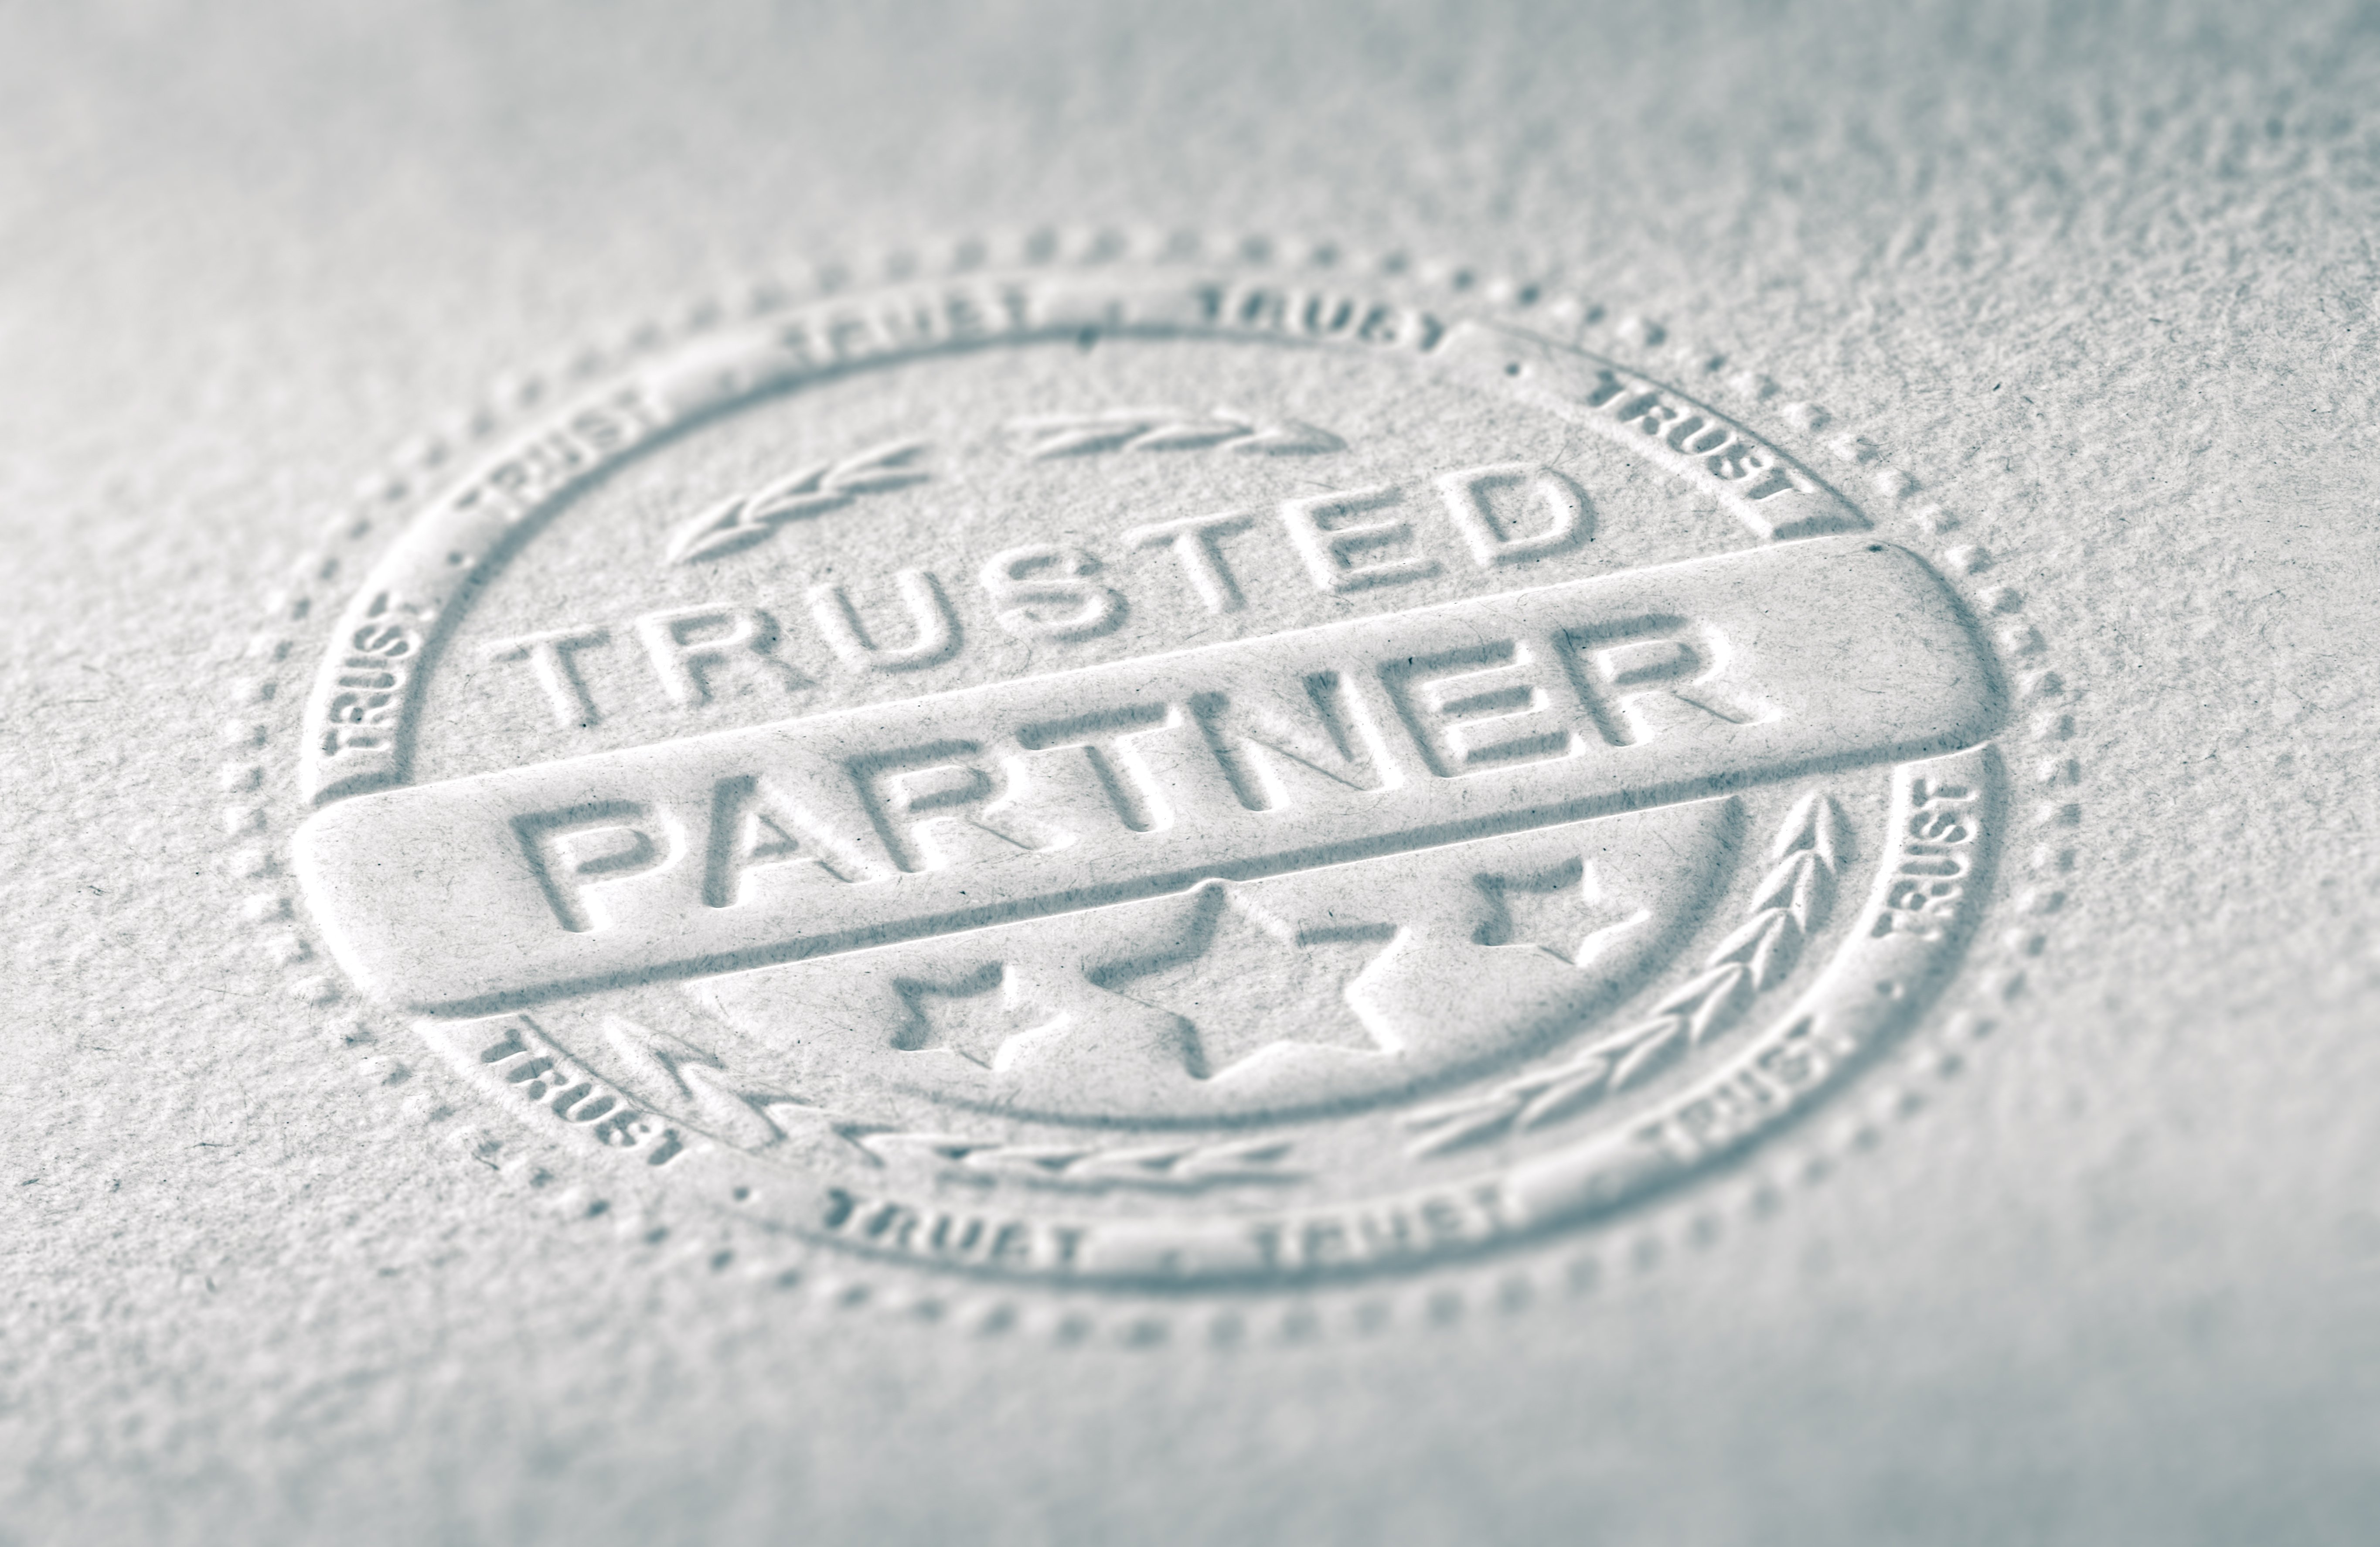 Trusted Partner Seal Image